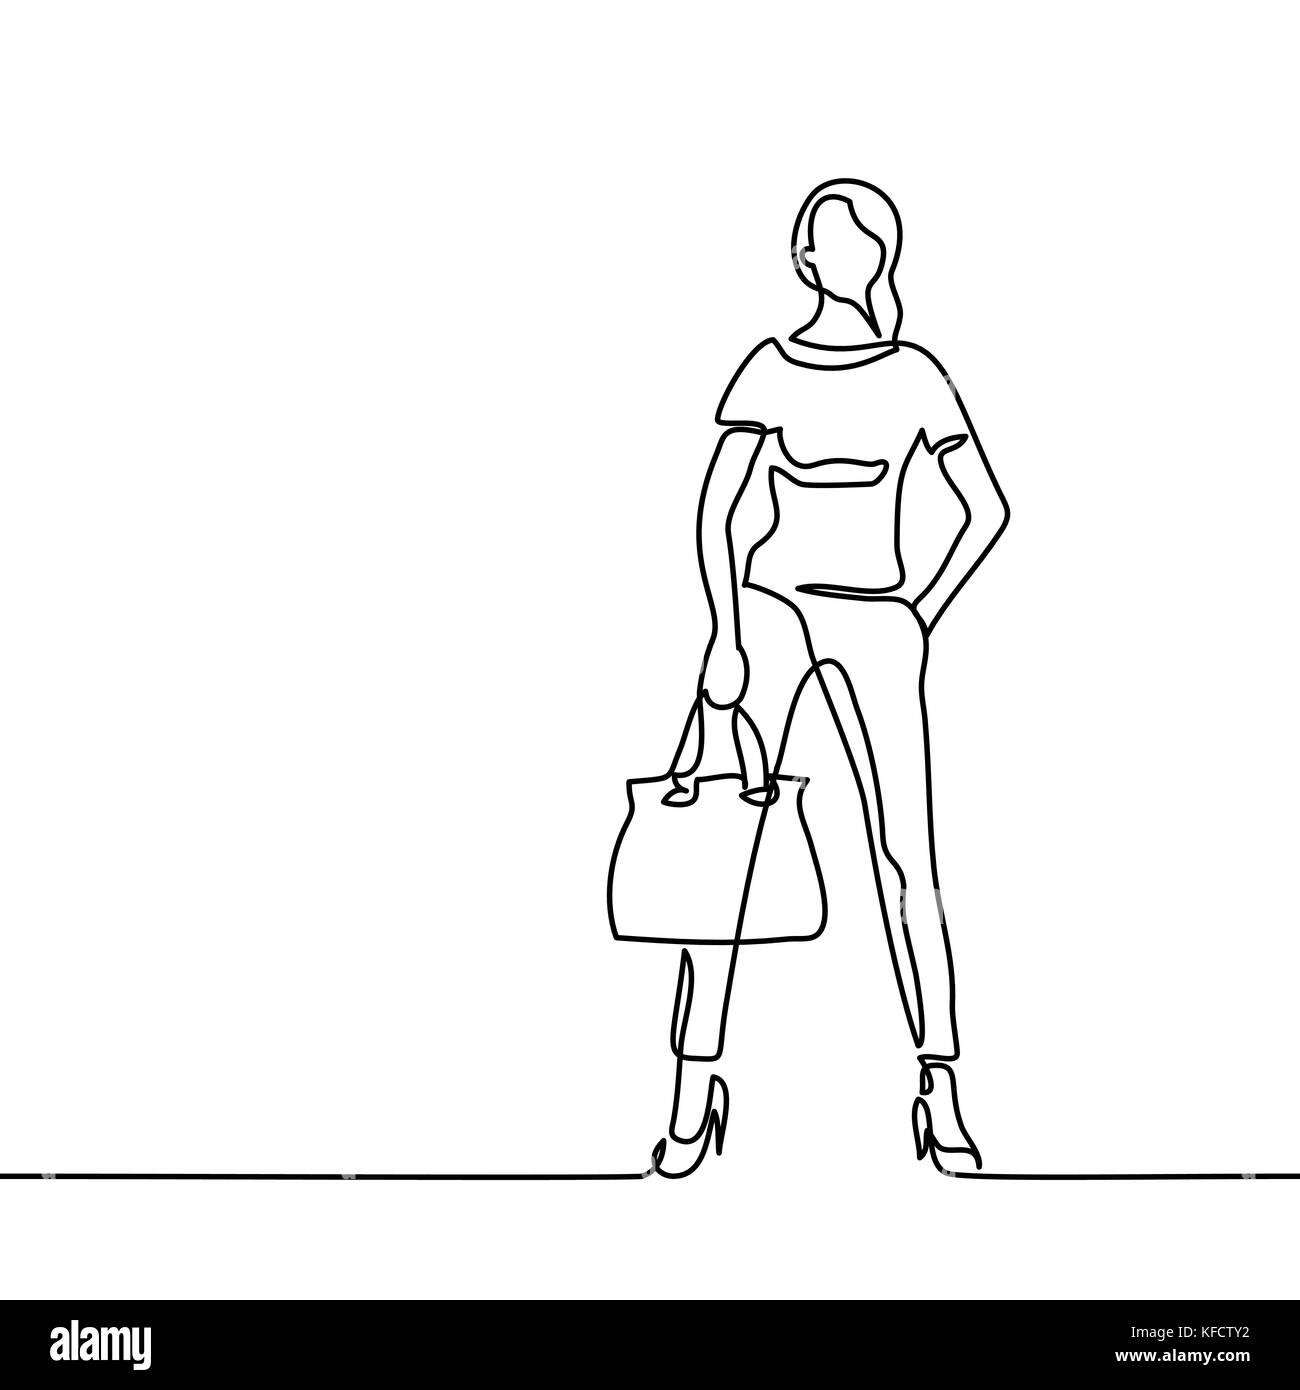 standing woman line drawing